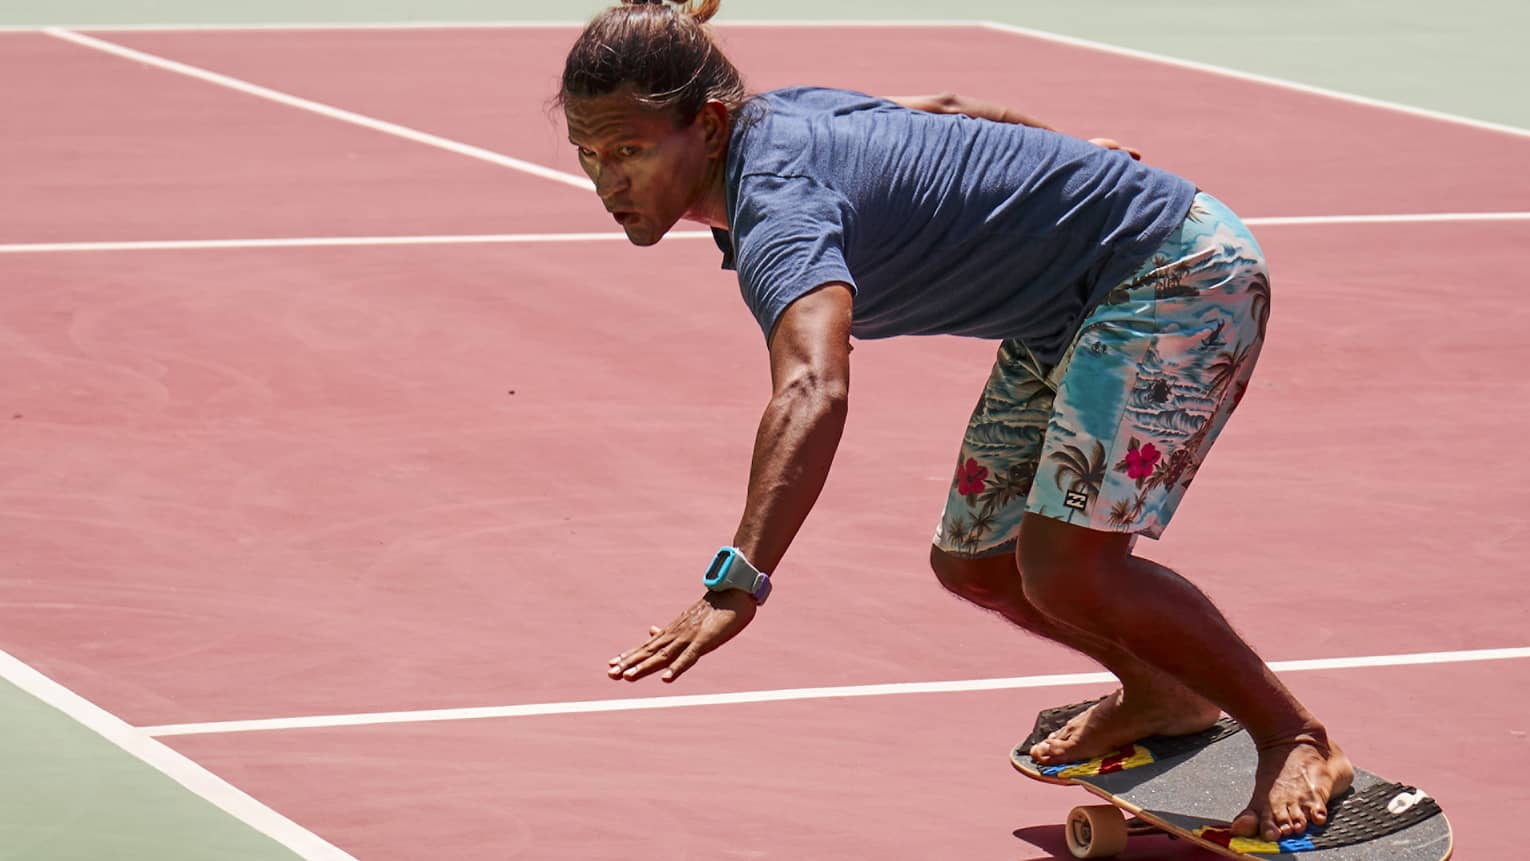 Person wearing light-blue, Hawaiian-print board shorts and a navy t-shirt rides a skateboard around a cone on a tennis court